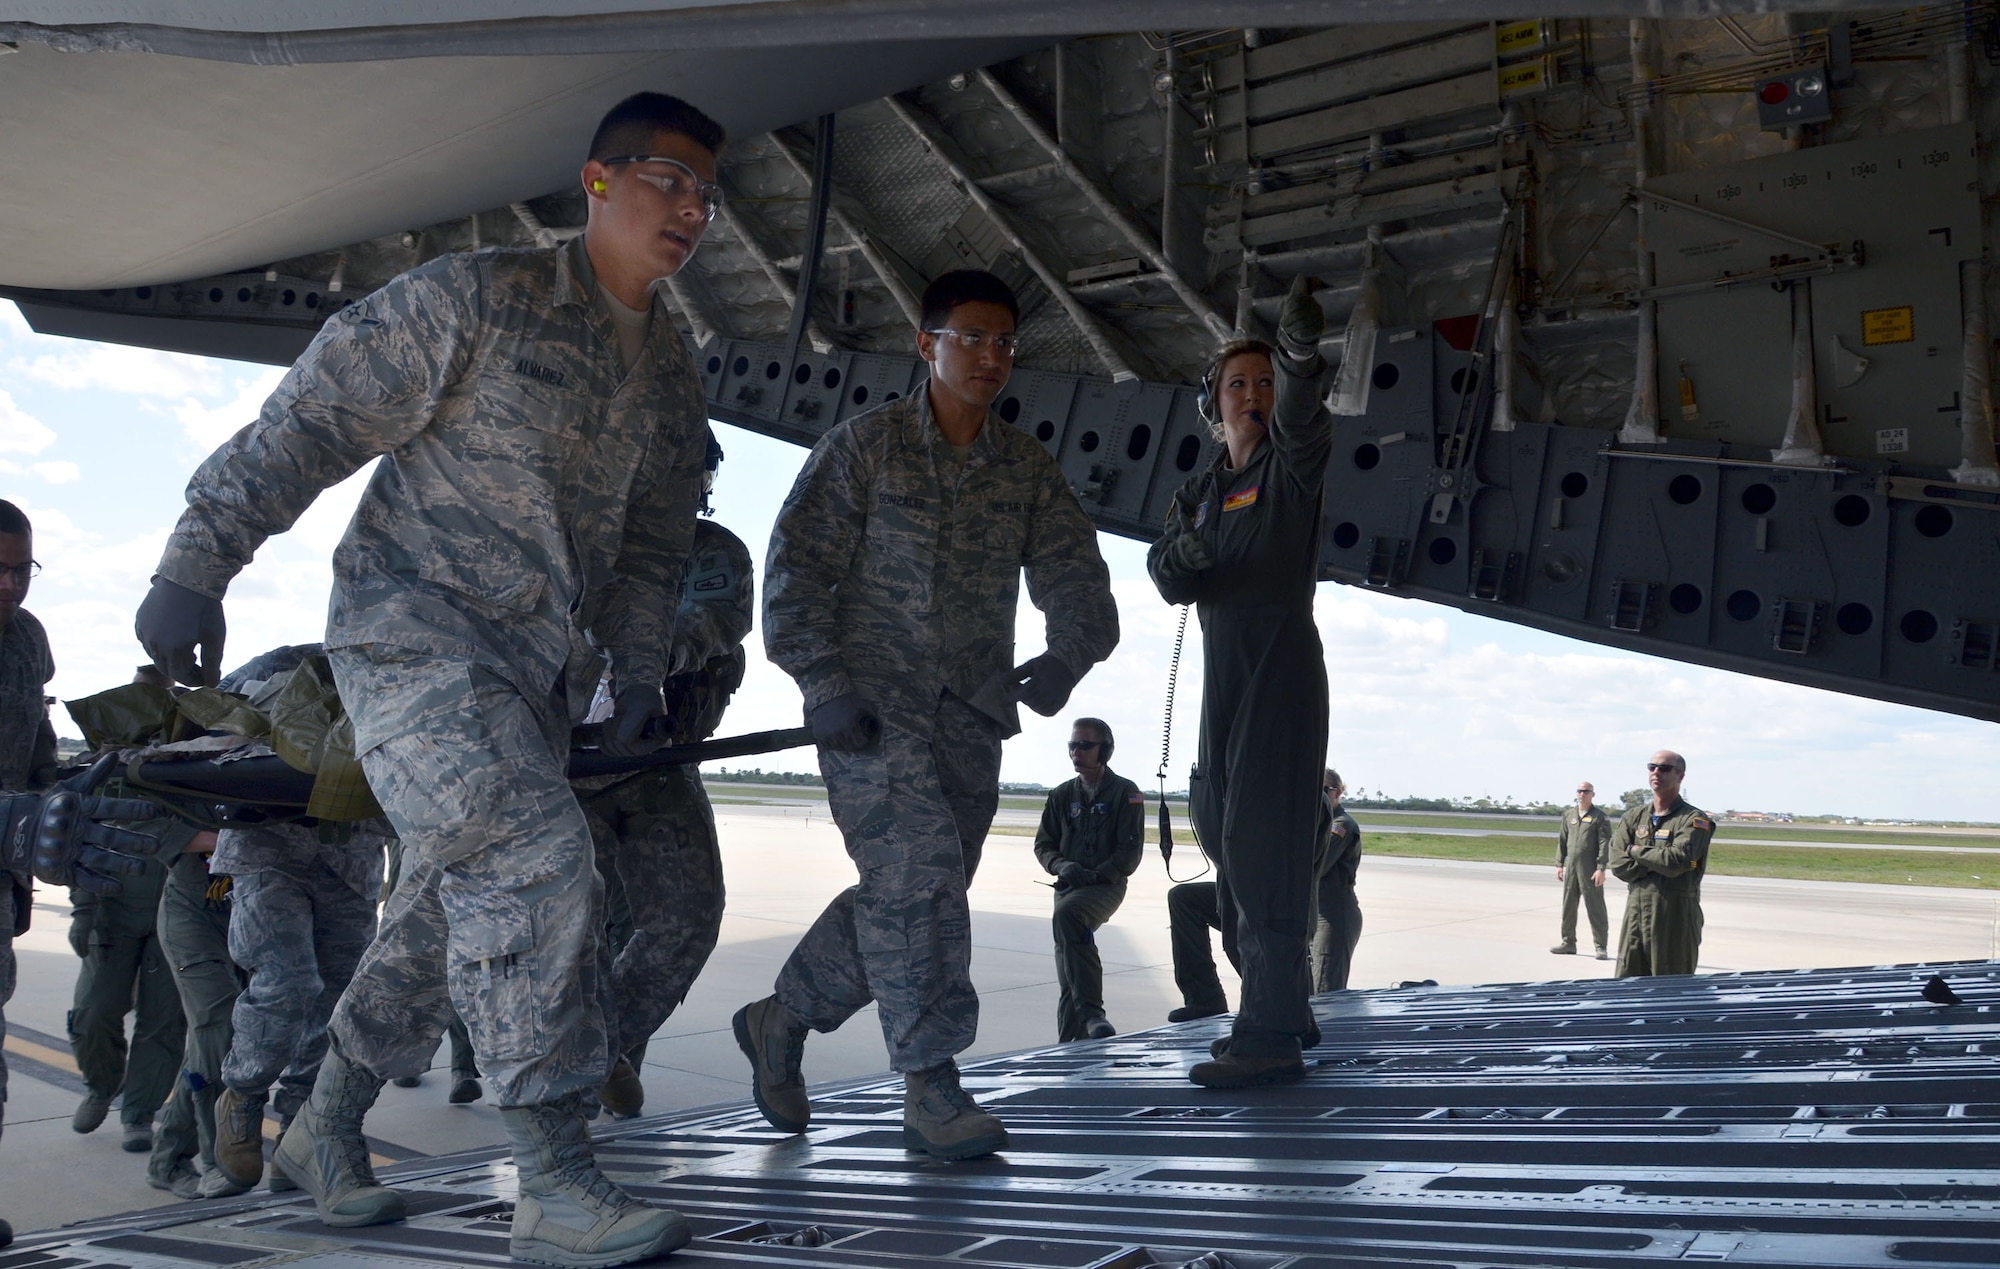 Airman Michael Alvarez, left, and Staff Sgt. Roberto Gonzalez, center, both reservists with the 920th Aeromedical Staging Squadron, load a simulated patient onto a C-17 Globemaster III during the fifth annual MEDBEACH joint medical response exercise at Patrick Air Force Base, Fla., March 5, 2017. The C-17 and an Army National Guard UH-60 Black Hawk were flown in to provide a staging platform for stabilization and transport of battlefield-injured service members. (U.S. Air Force photo by Capt. Leslie Forshaw)